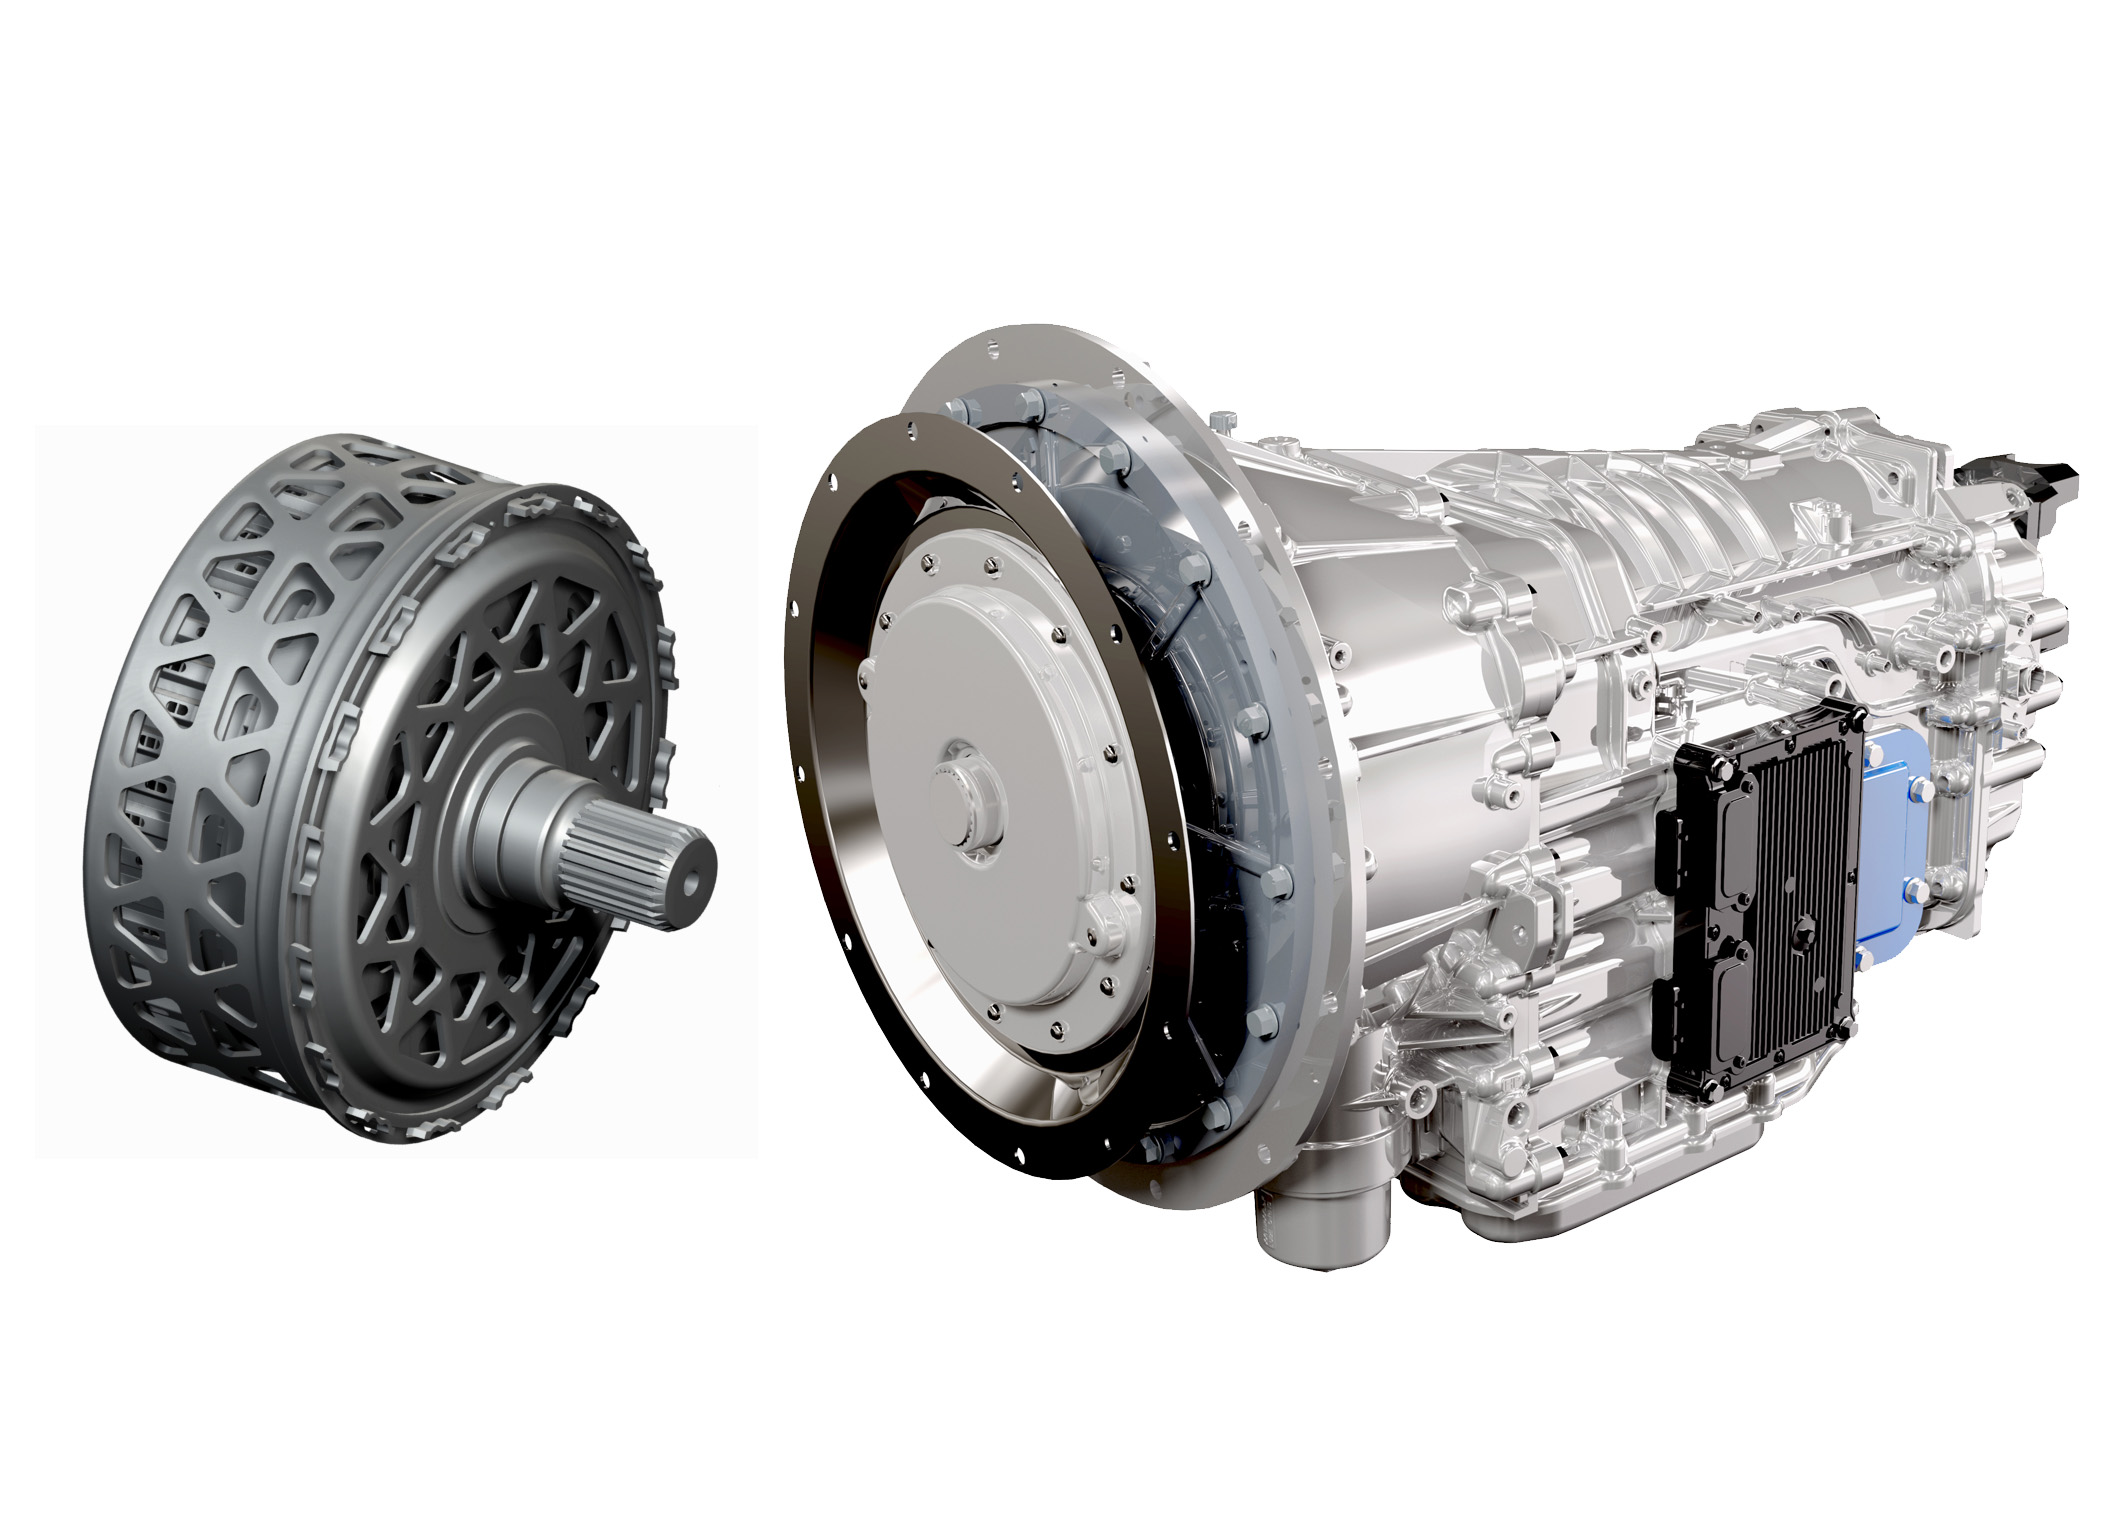 BorgWarner produces DualTronic™ clutch modules (left) for Eaton’s new Procision™ 7-speed dual-clutch transmission (right), the first dual-clutch transmission for class 6 and 7 medium-duty trucks in North America.